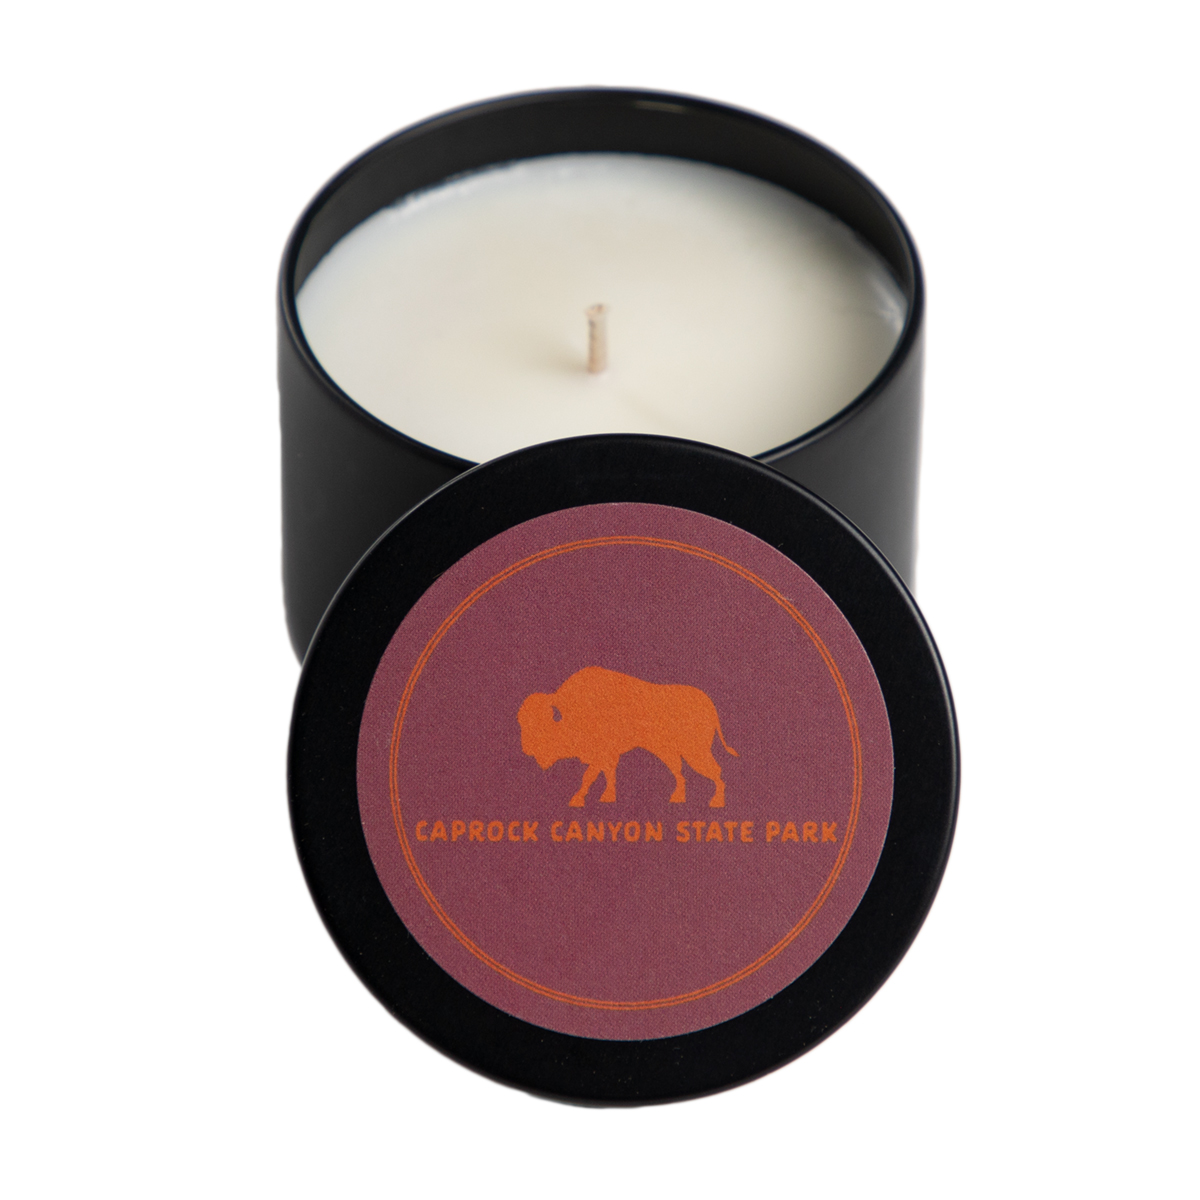 Caprock Canyon State Park Candle, 4oz.